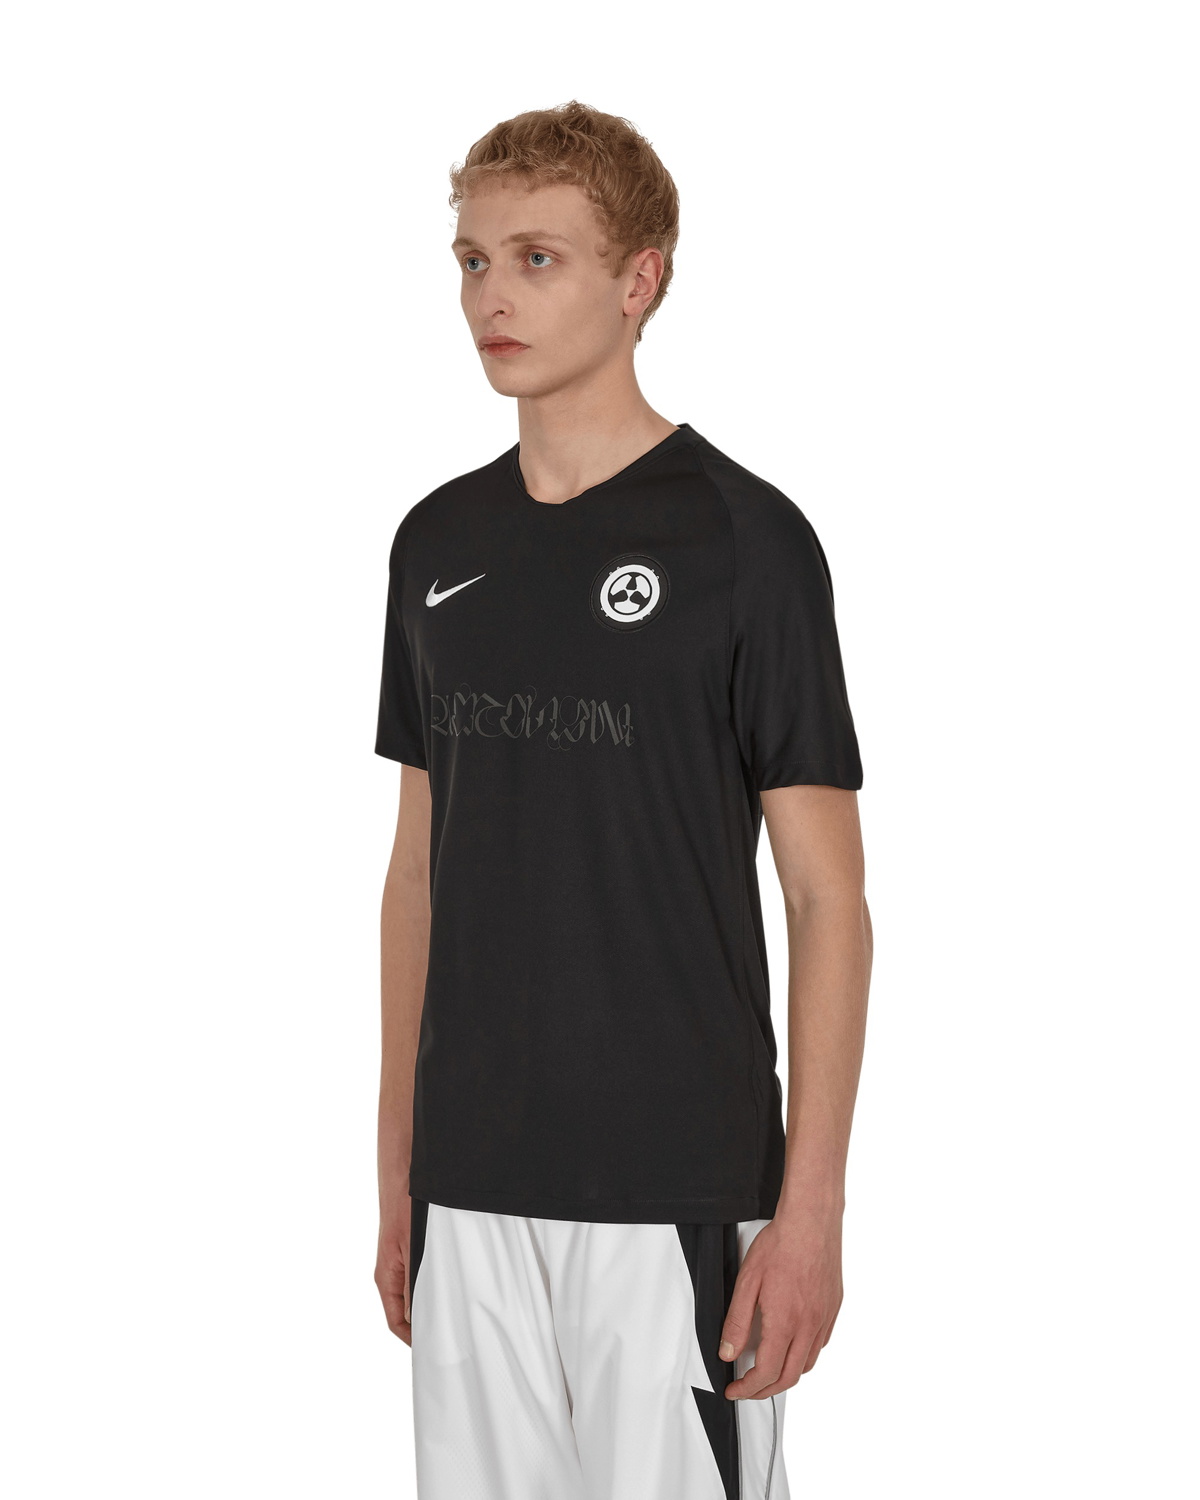 Acronym® Stadium Jersey T Shirt Nike Special Project